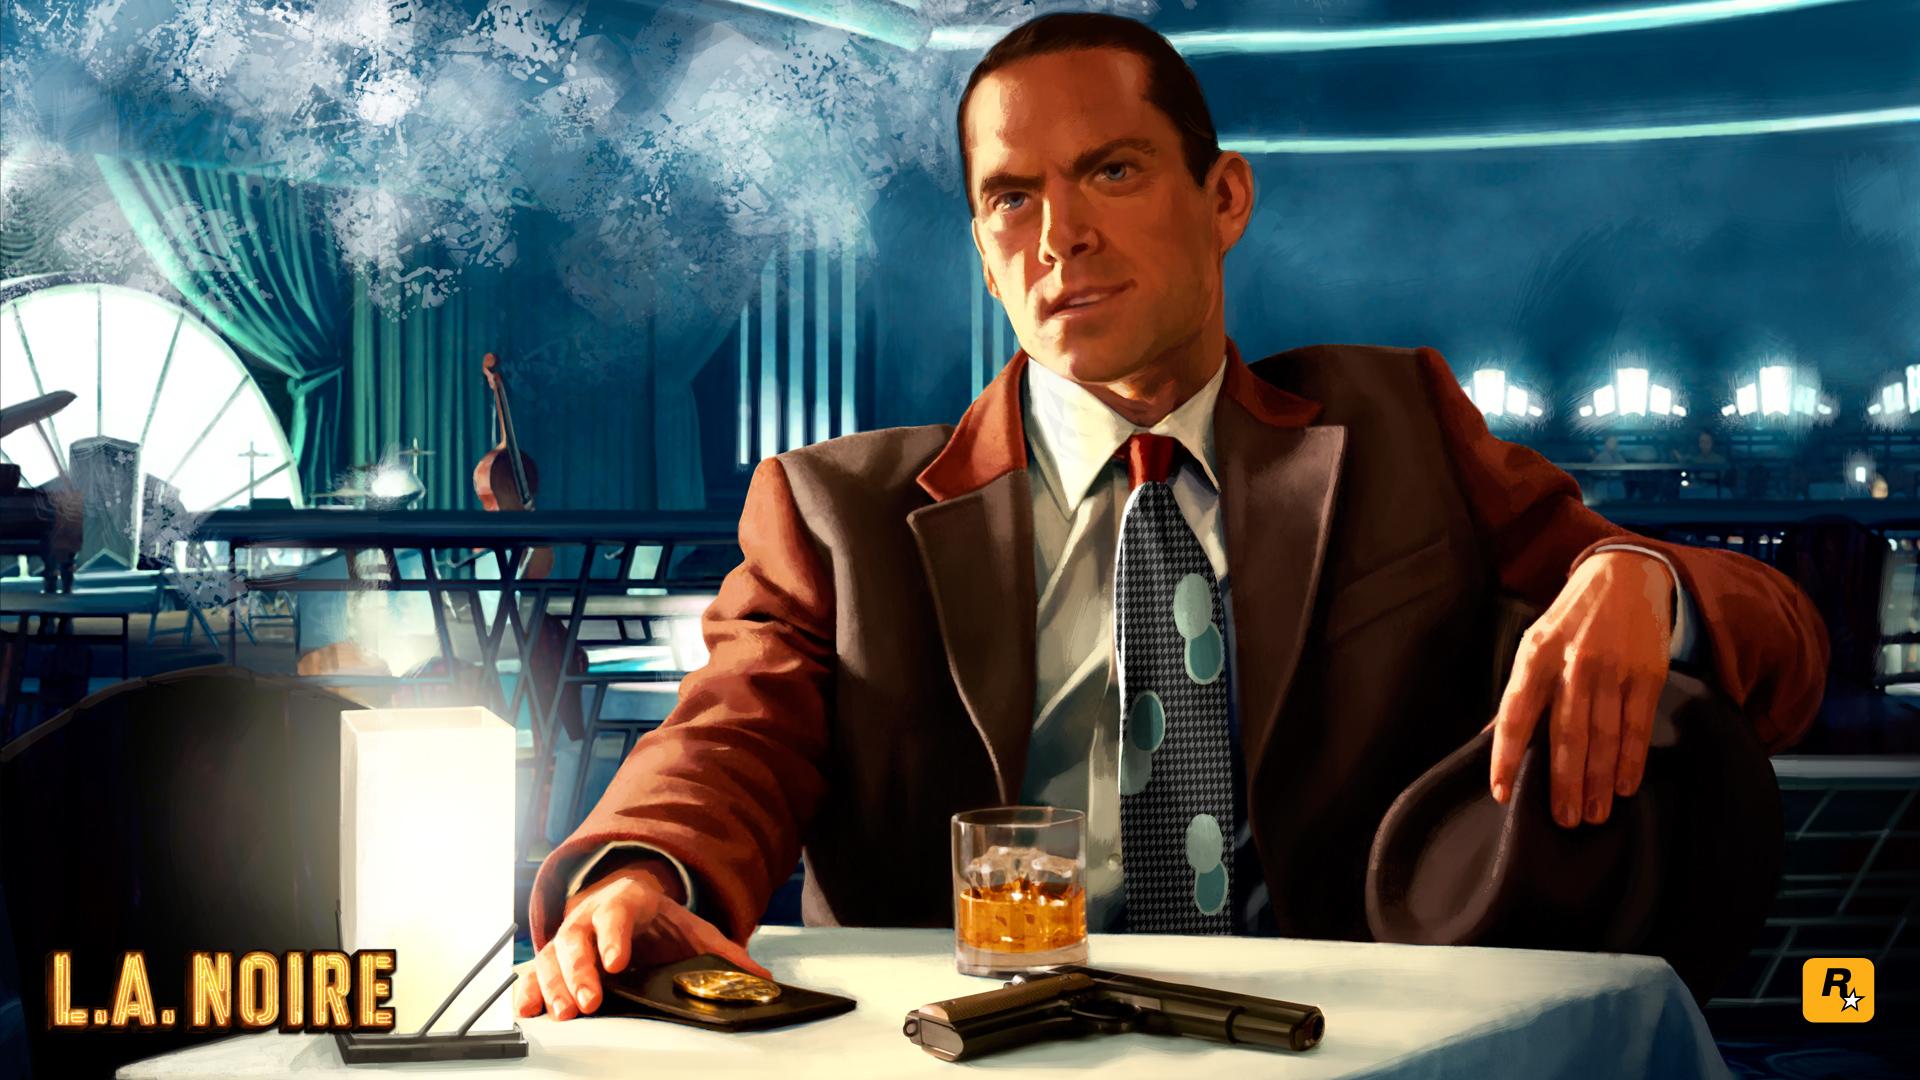 1920 x 1080 · jpeg - Wallpapers from L.A. Noire | gamepressure